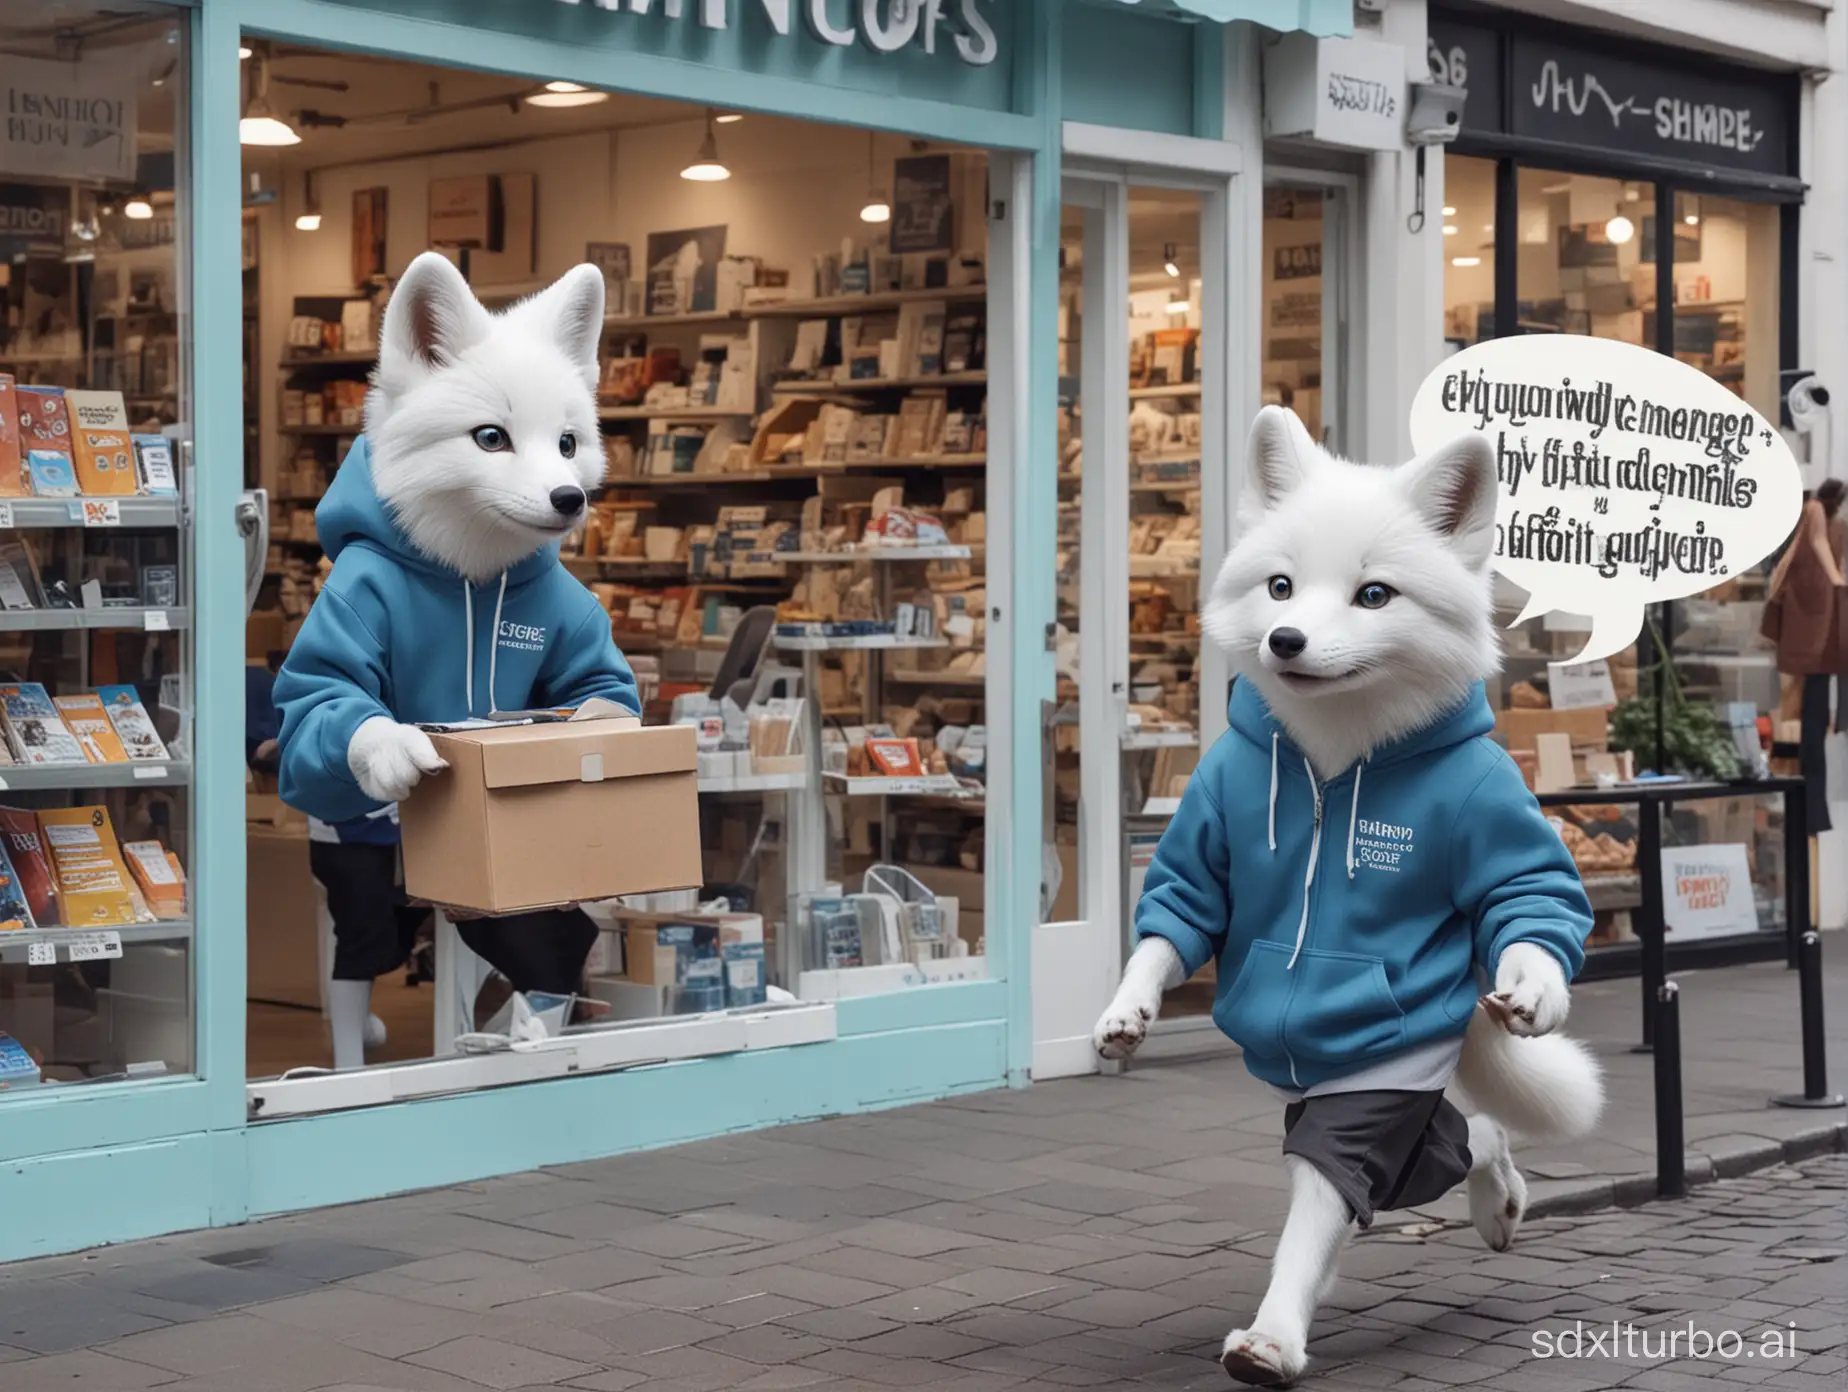 A white fox has just stolen a laptop from a store and is running away with it. There is panic on his face because the fishmonger is chasing him. The laptop appears to be silver colored, medium sized. At the bottom of the image there is a quote typed in bold stylized cartoon text with a white border, "INFINITY BOOST". In the background, a vendor is yelling at a white fox dressed in a blue hoodie. Next to the store clerk is a speech bubble labeled "Hey!!!". The setting is an open door with computer counters and people walking by, typography, photo